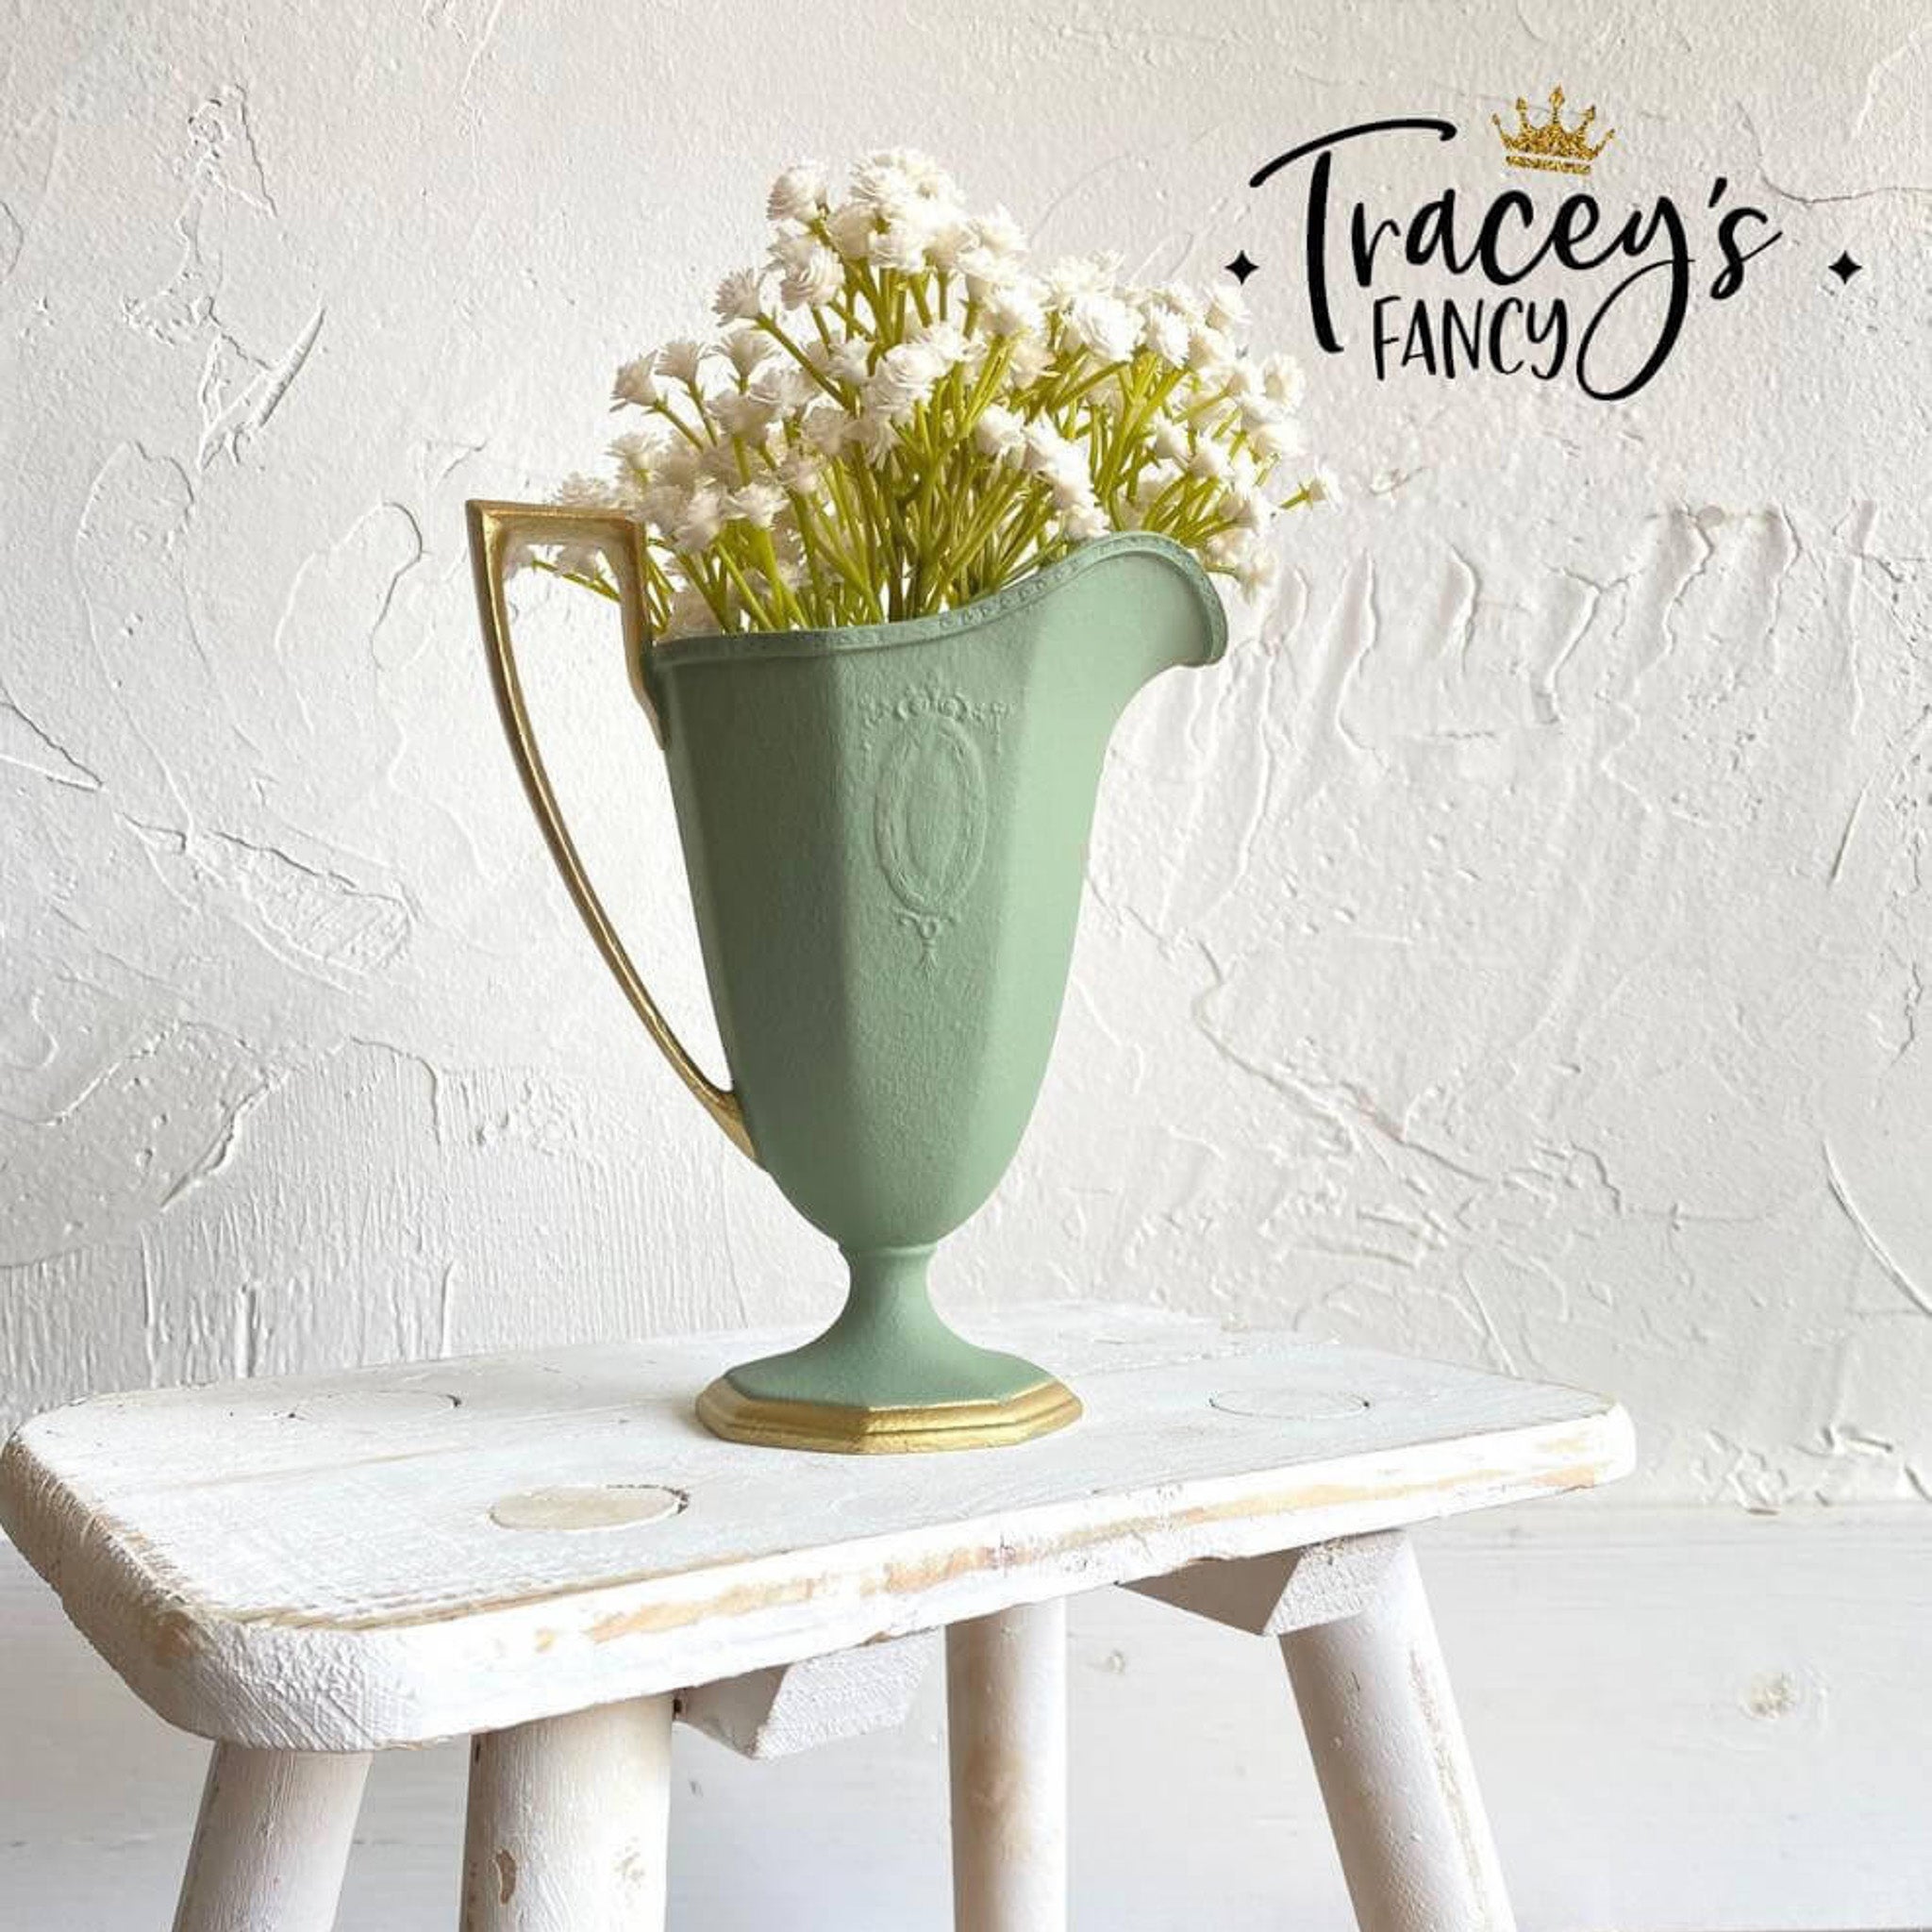 A ceramic water pitcher refurbished by Tracey's Fancy is painted in Dixie Belle's Weeping Willow Chalk Mineral Paint and has a gold-painted handle and base border.